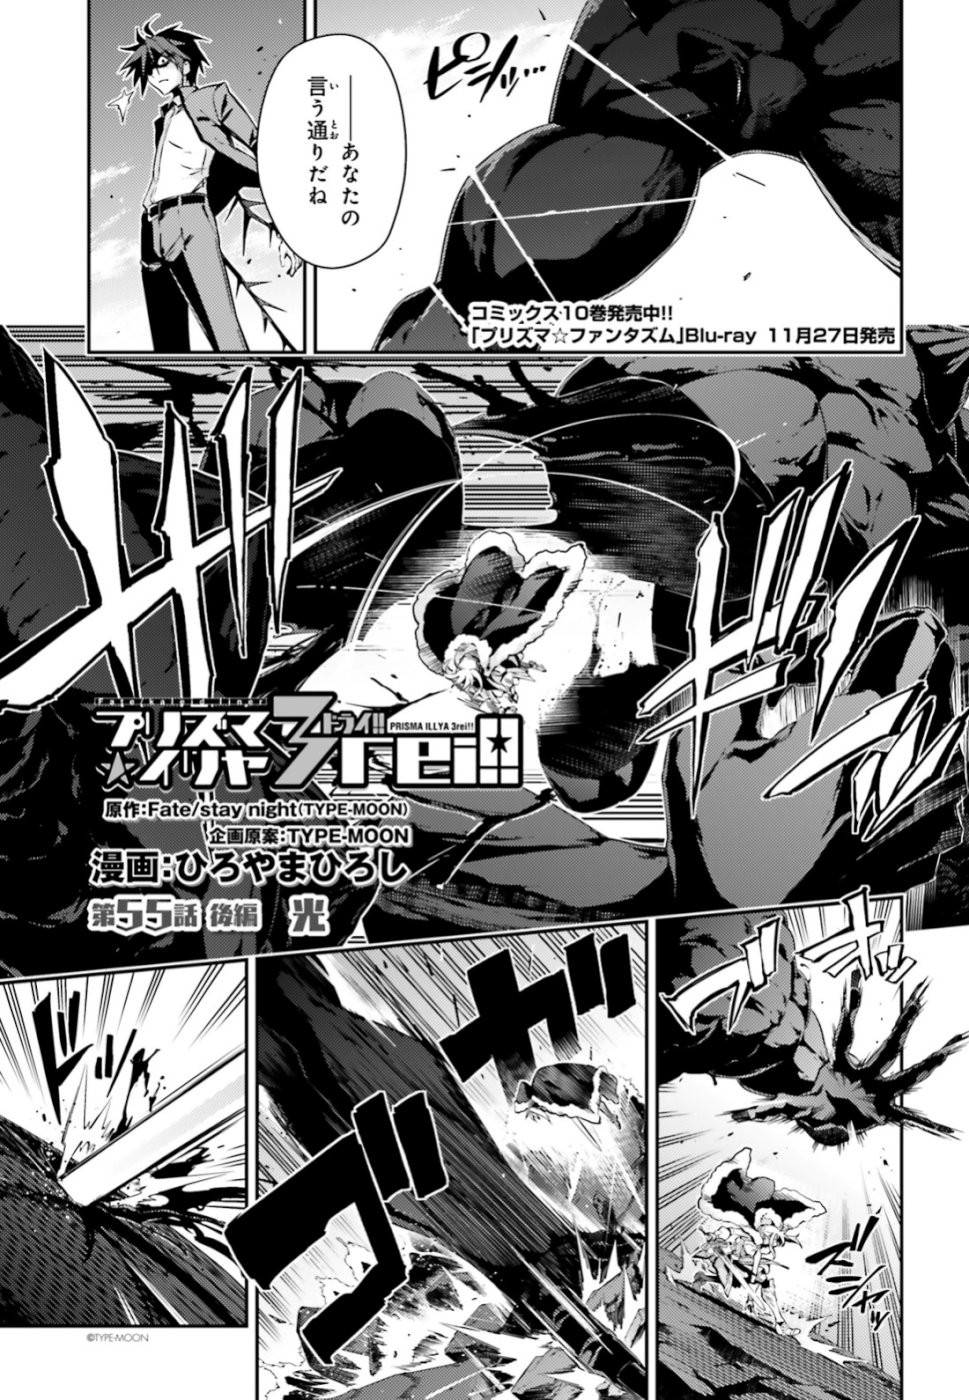 Fate/Kaleid Liner Prisma Illya Drei! - Chapter 55-2 - Page 1